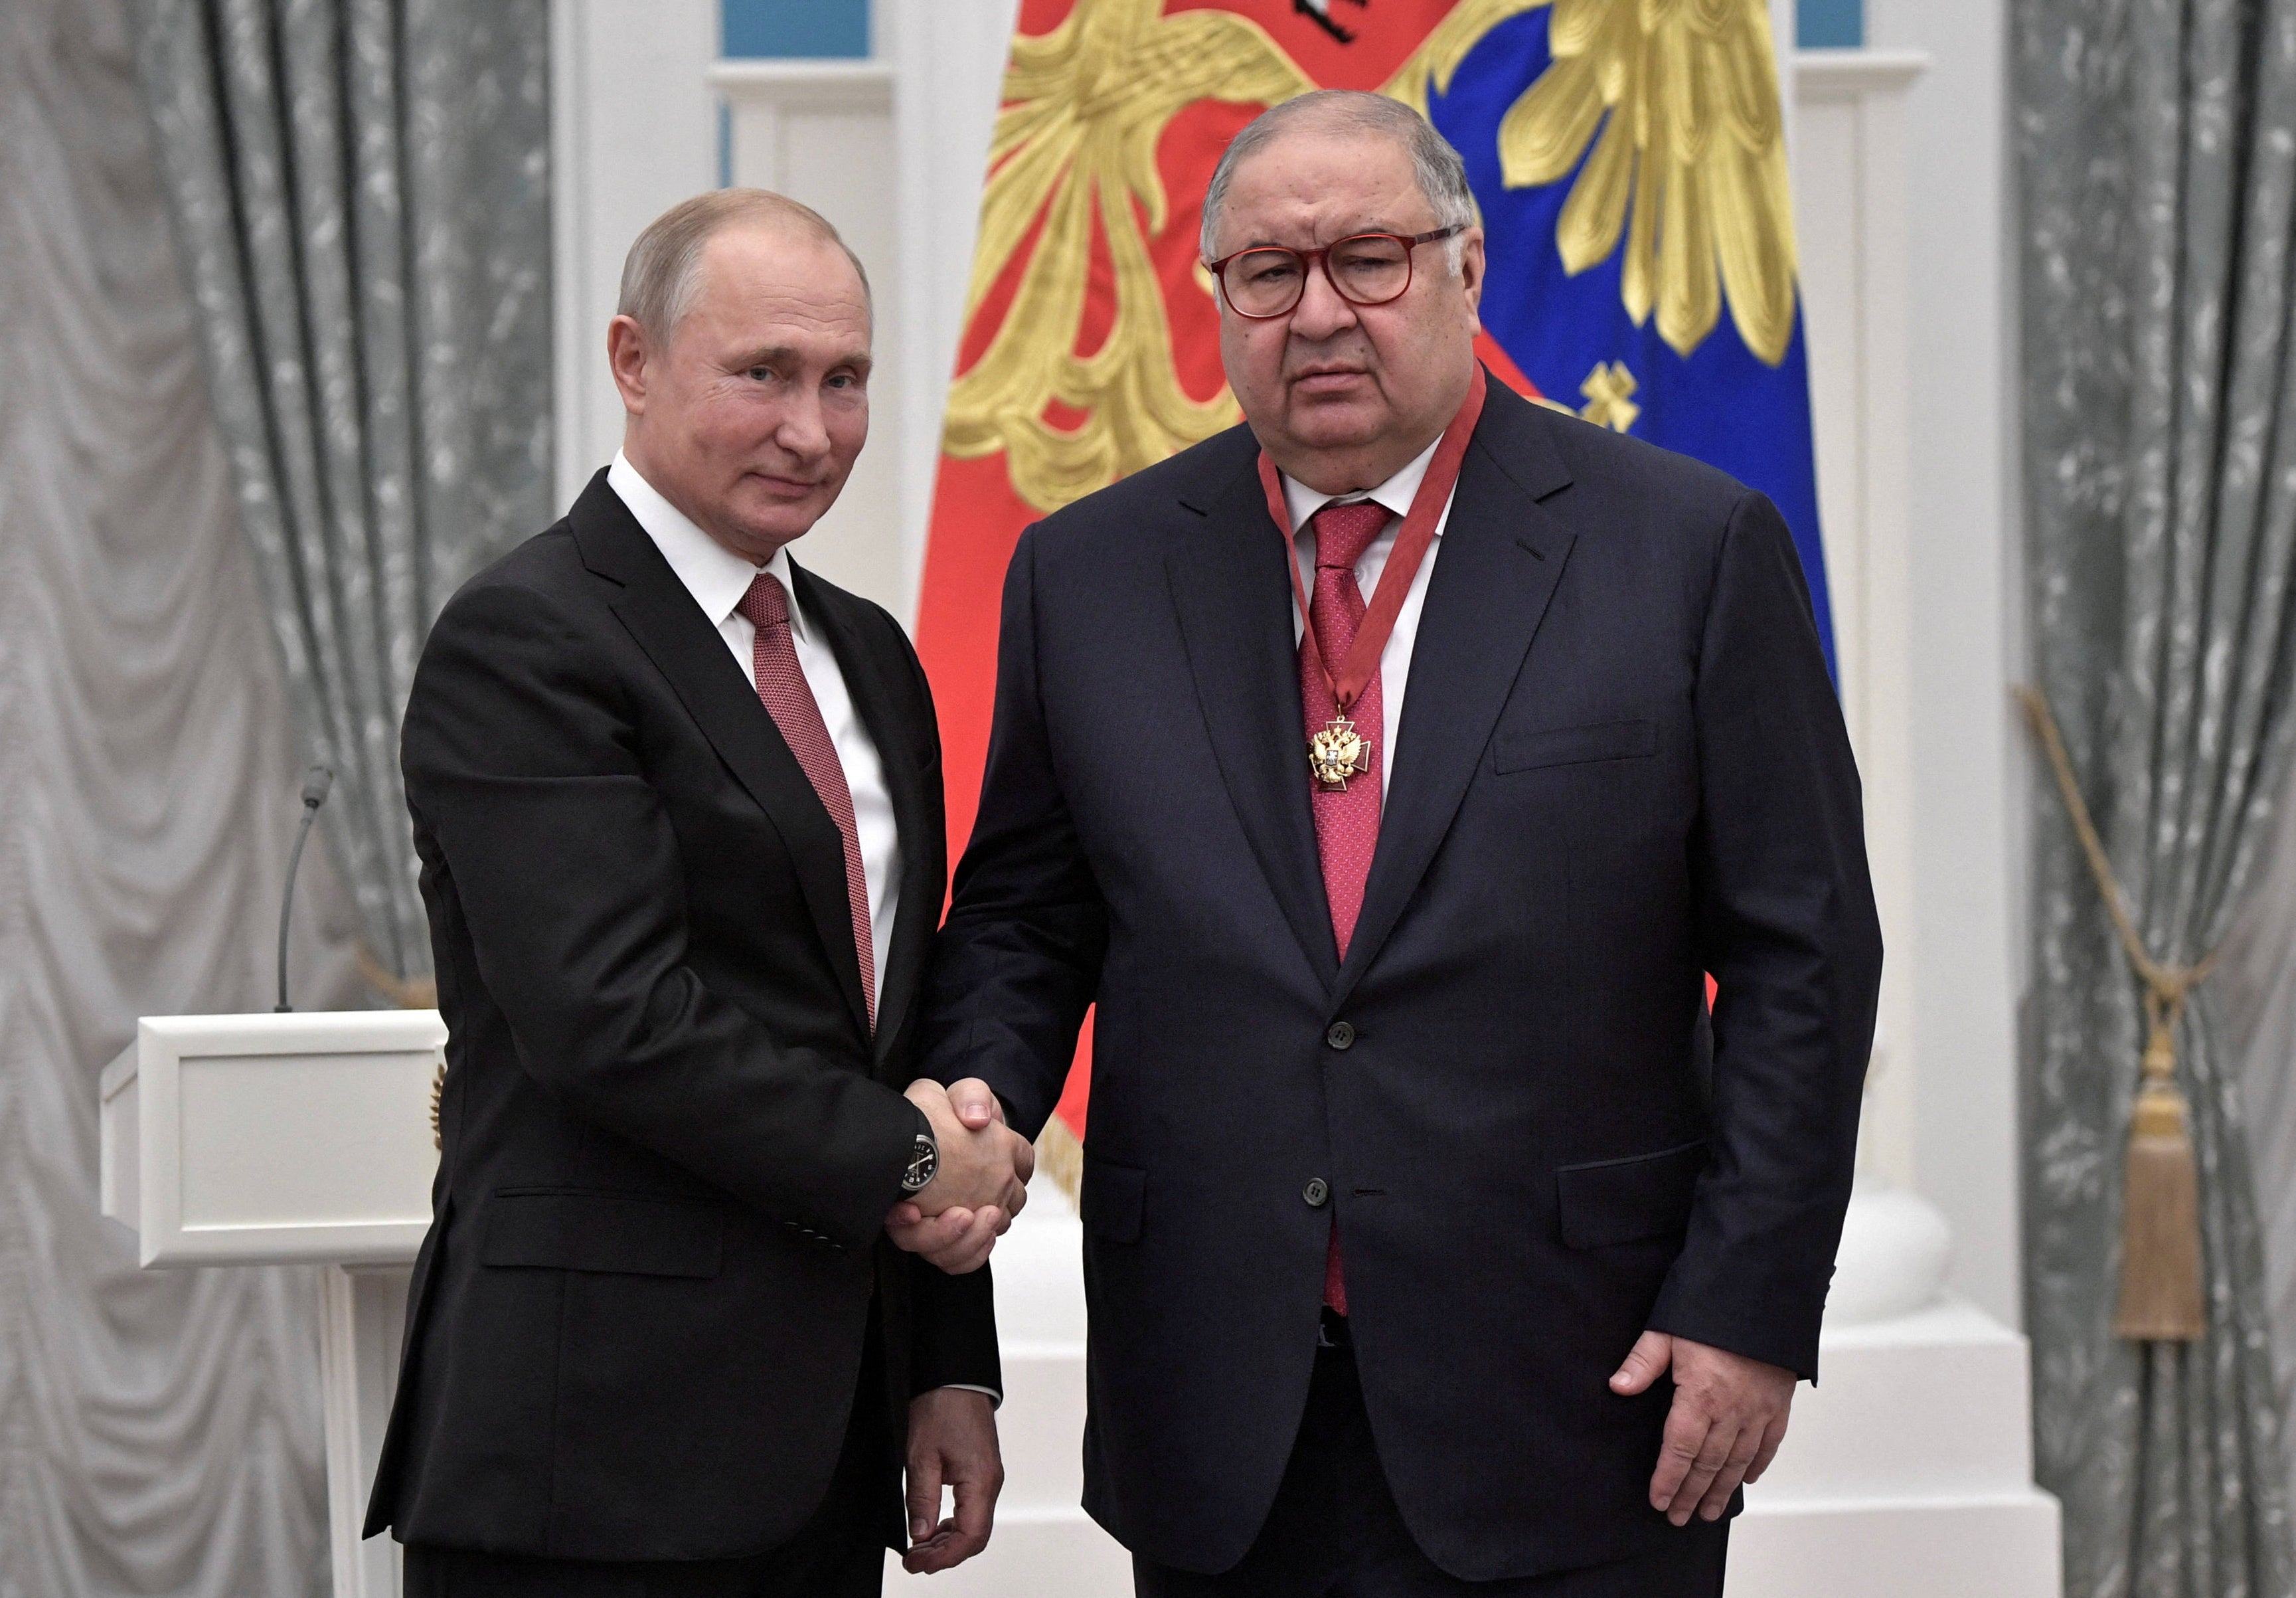 ussian President Vladimir Putin (L) shakes hands with Russian businessman and founder of USM Holdings Alisher Usmanov.